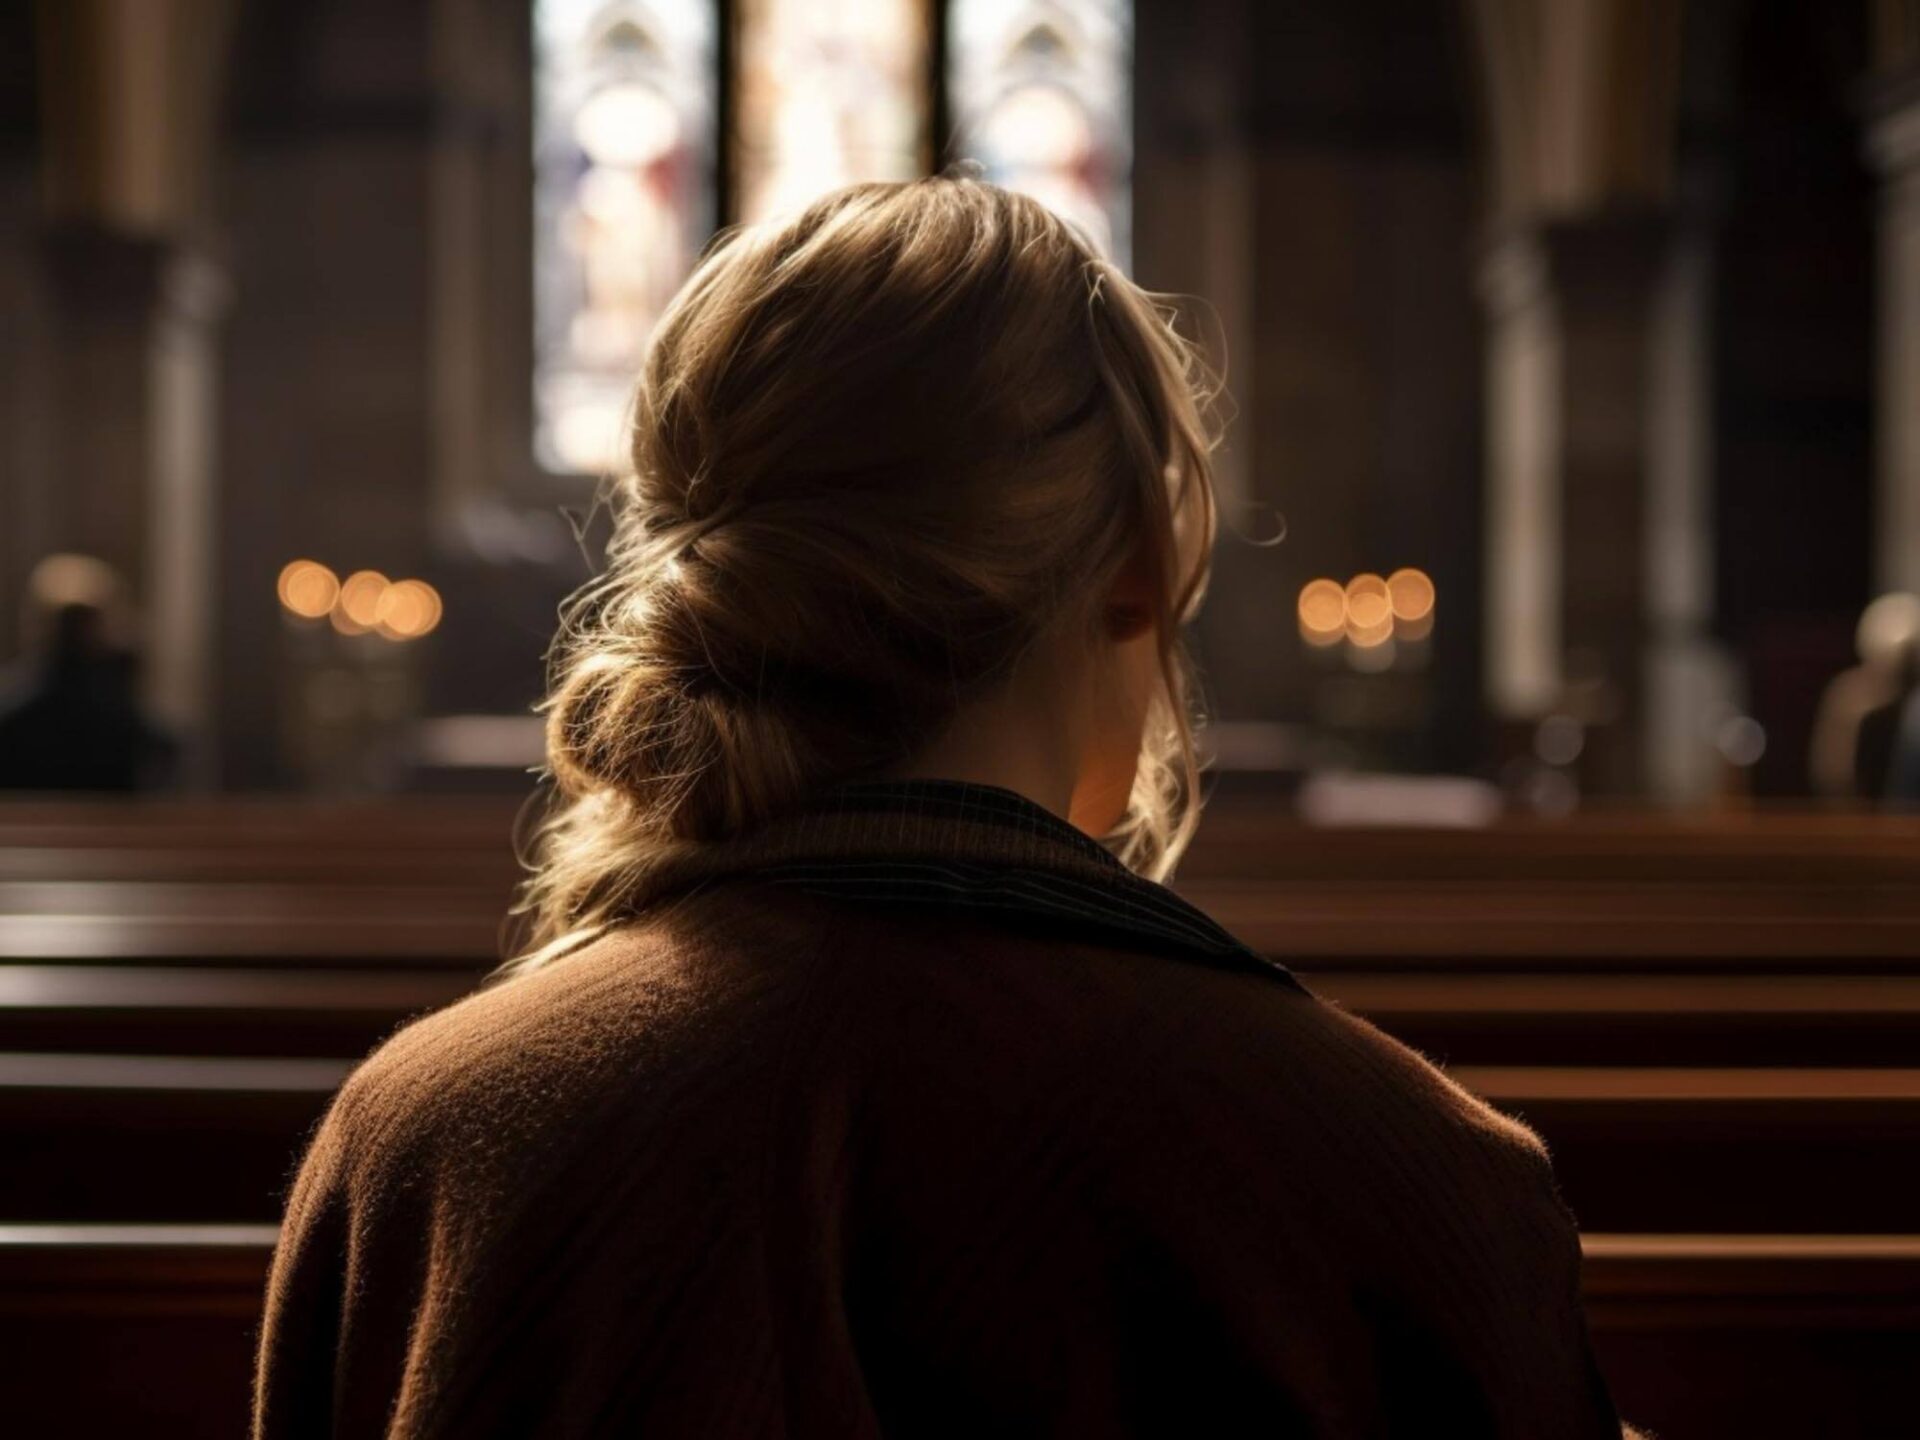 Strength and Support: Addressing Domestic Abuse within the Church